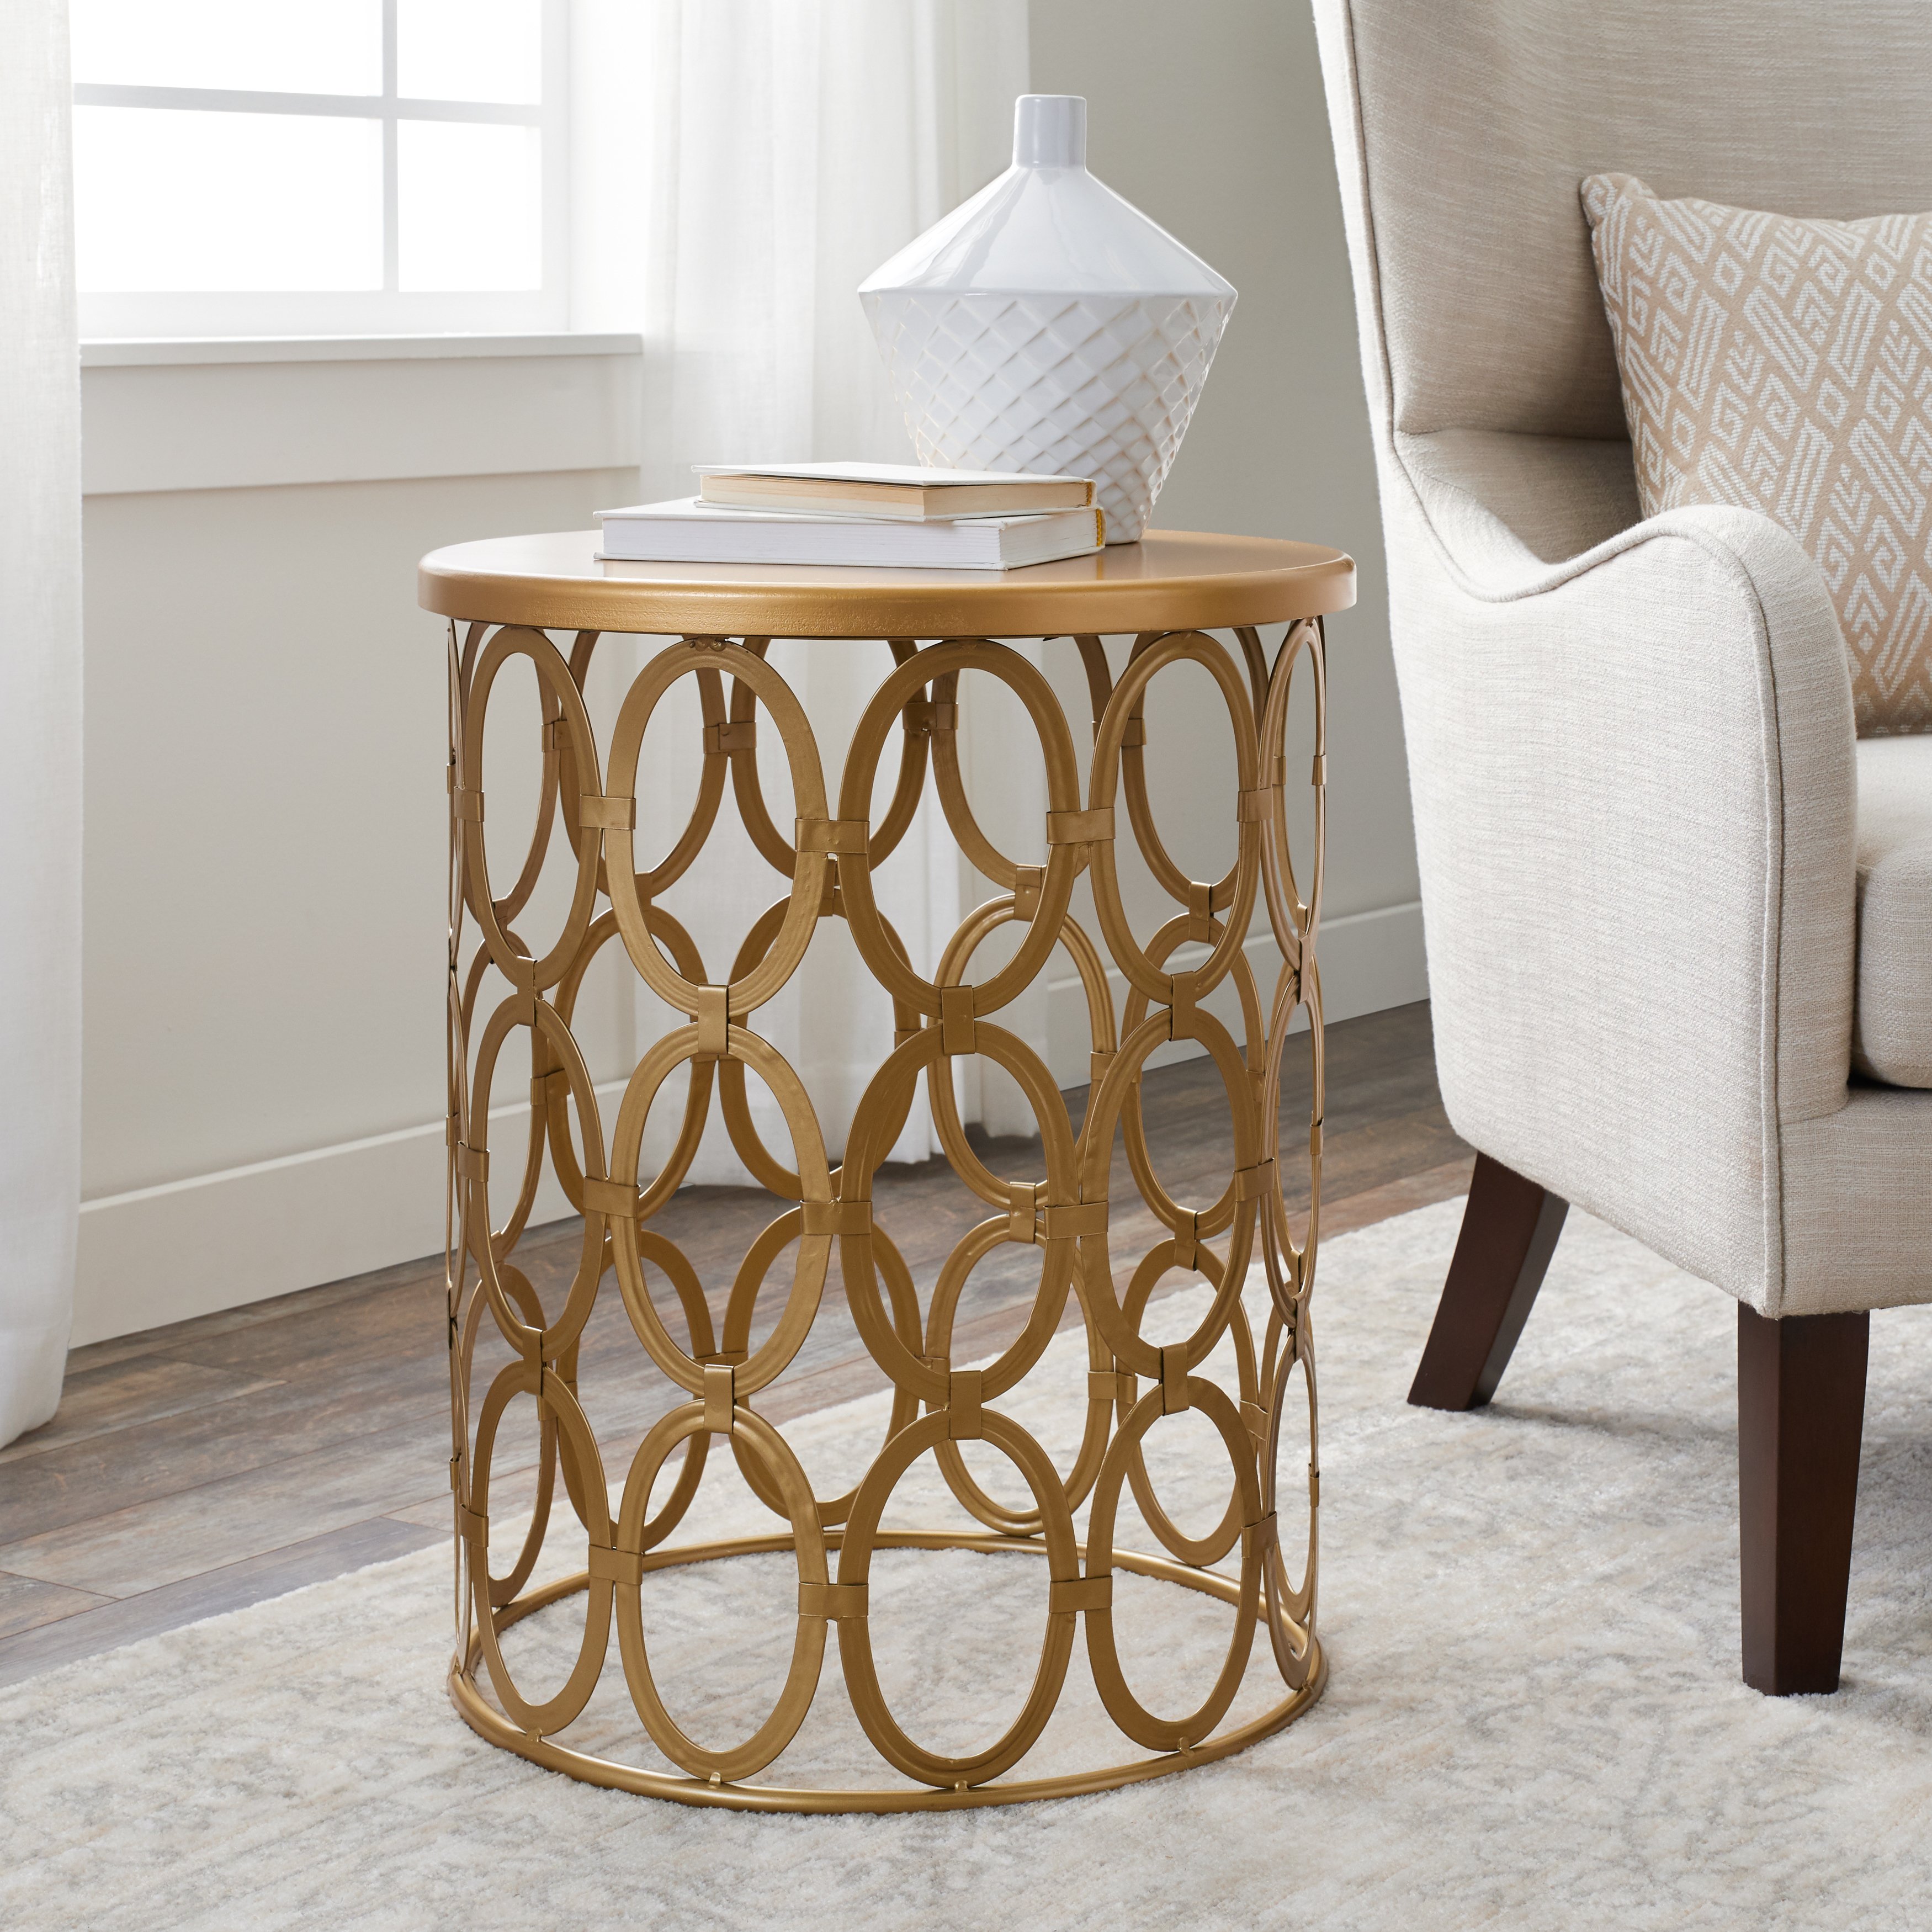 abbyson vista gold iron circles round end table antique faceted accent with glass top free shipping today small corner desk lawn chairs pineapple lights white piece coffee set